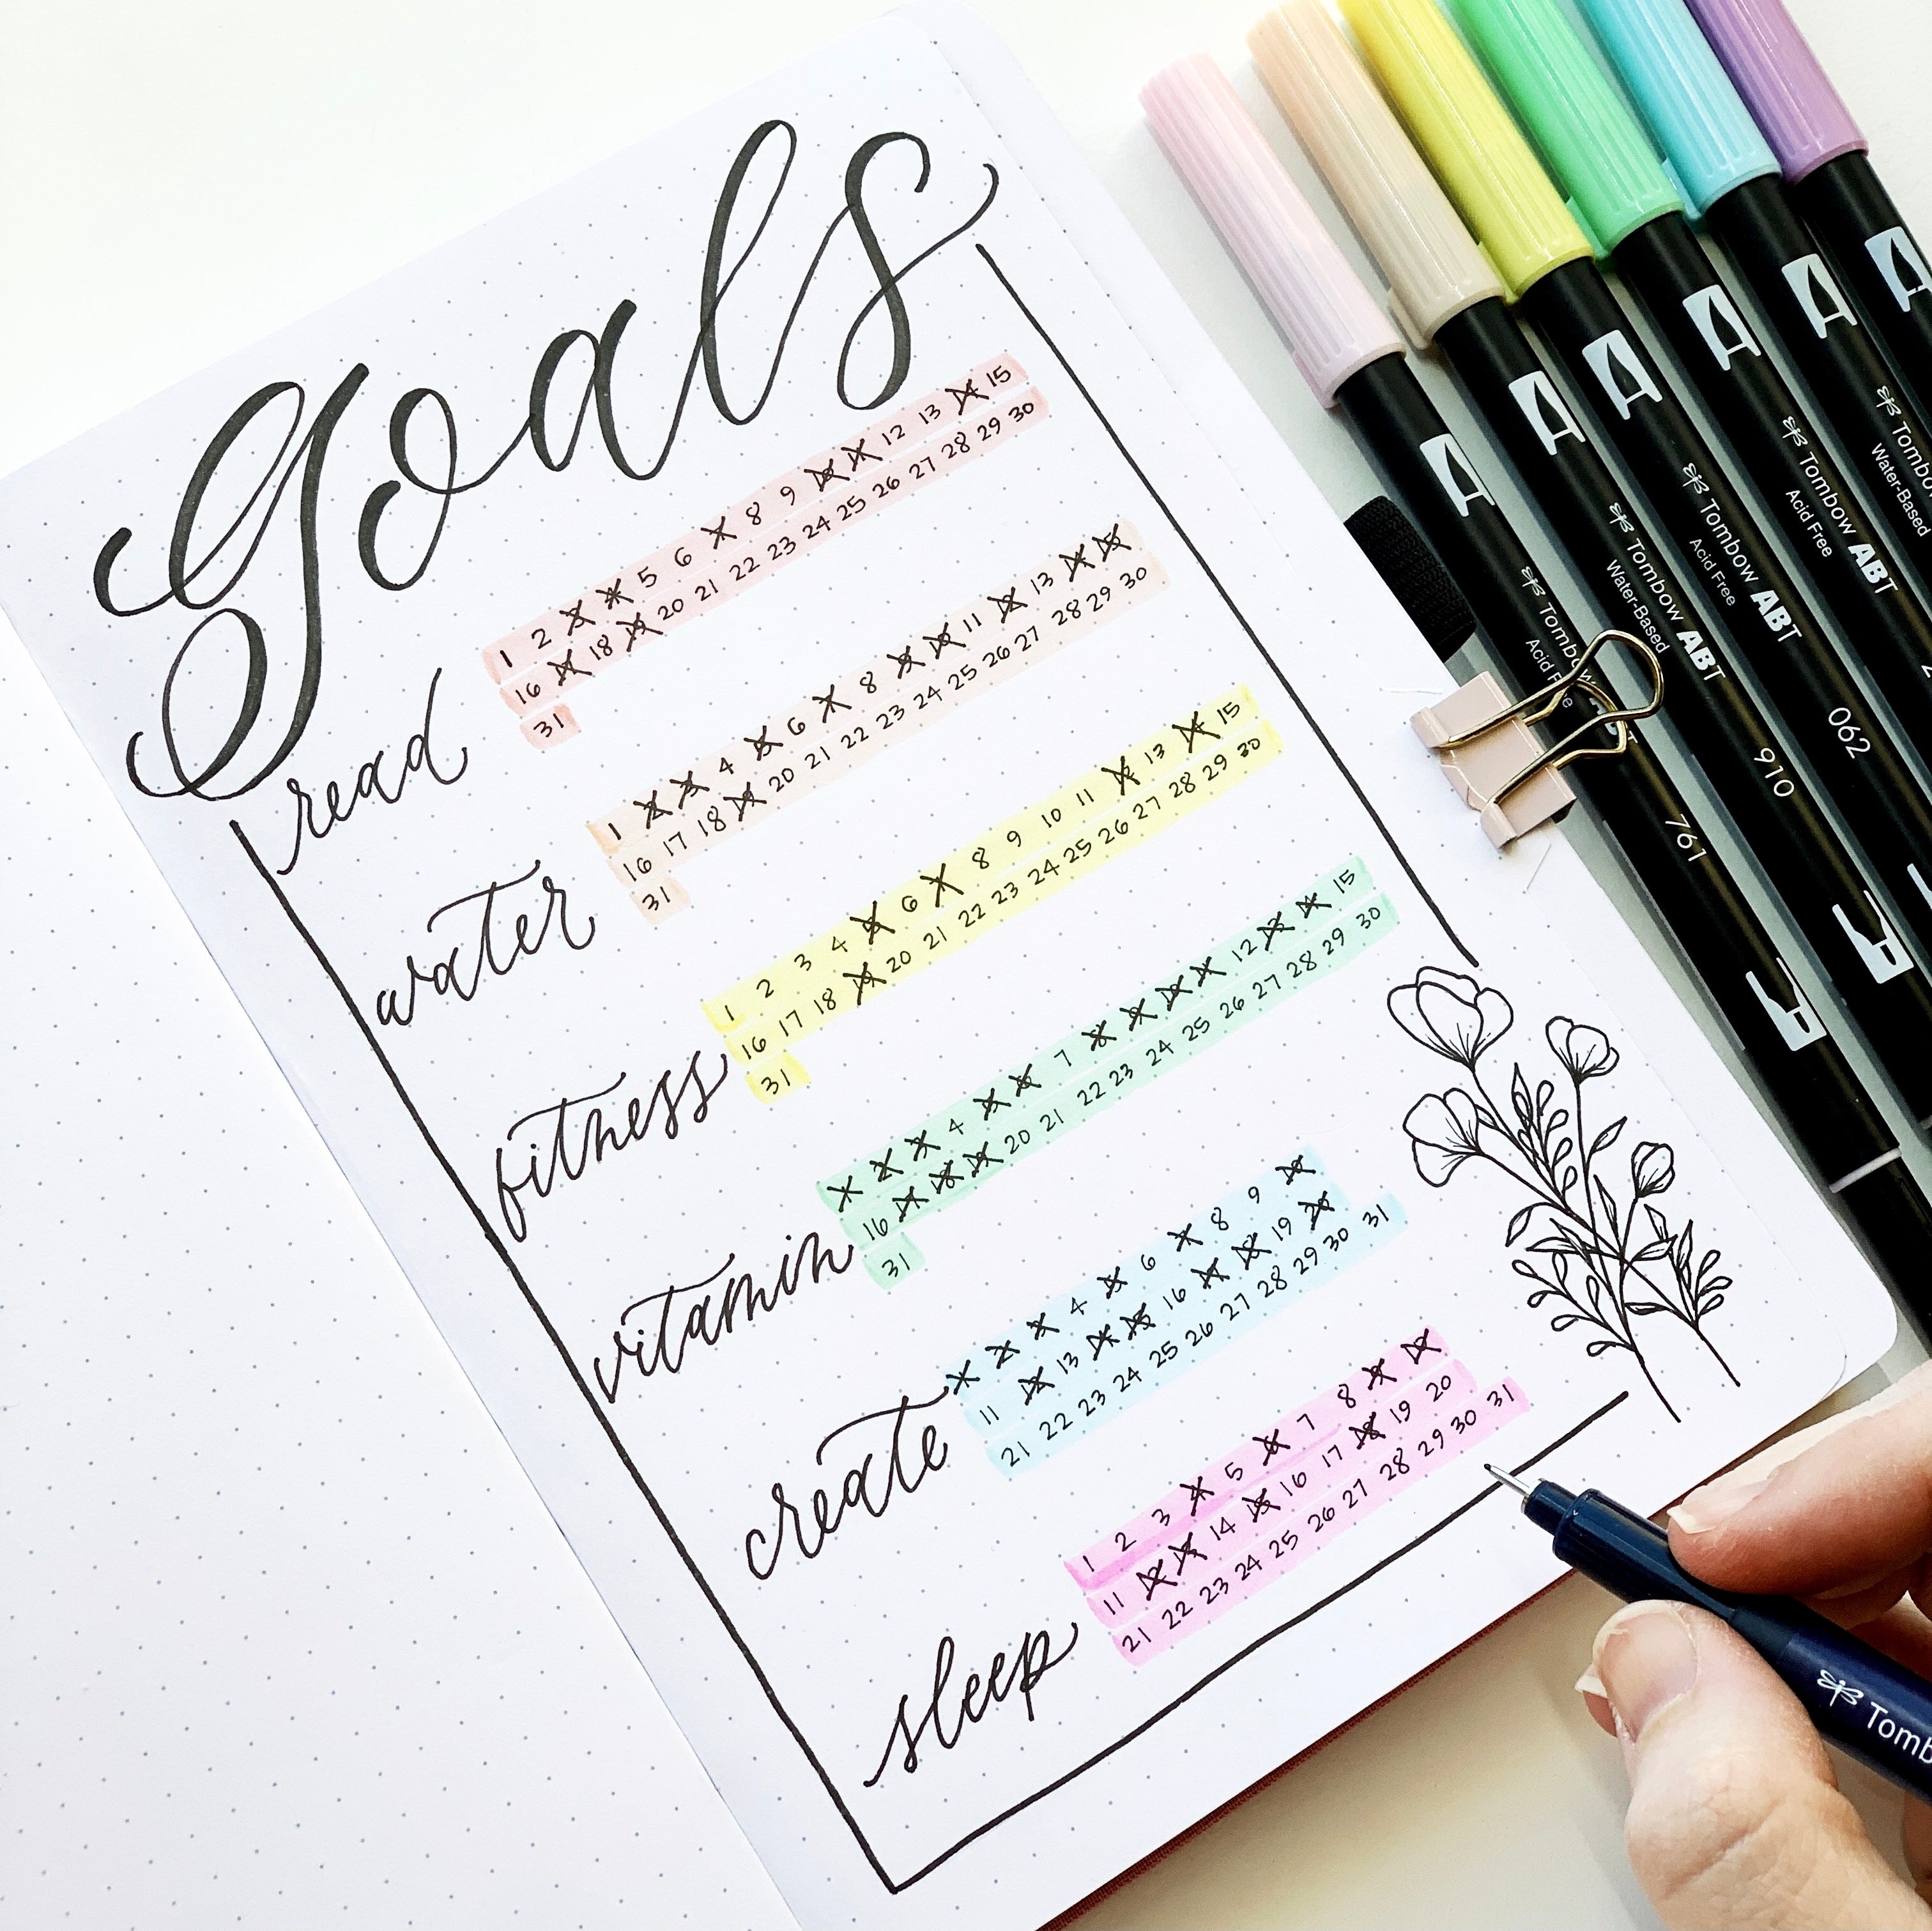 Create a goals page in your bullet journal with Adrienne from @studio80design!